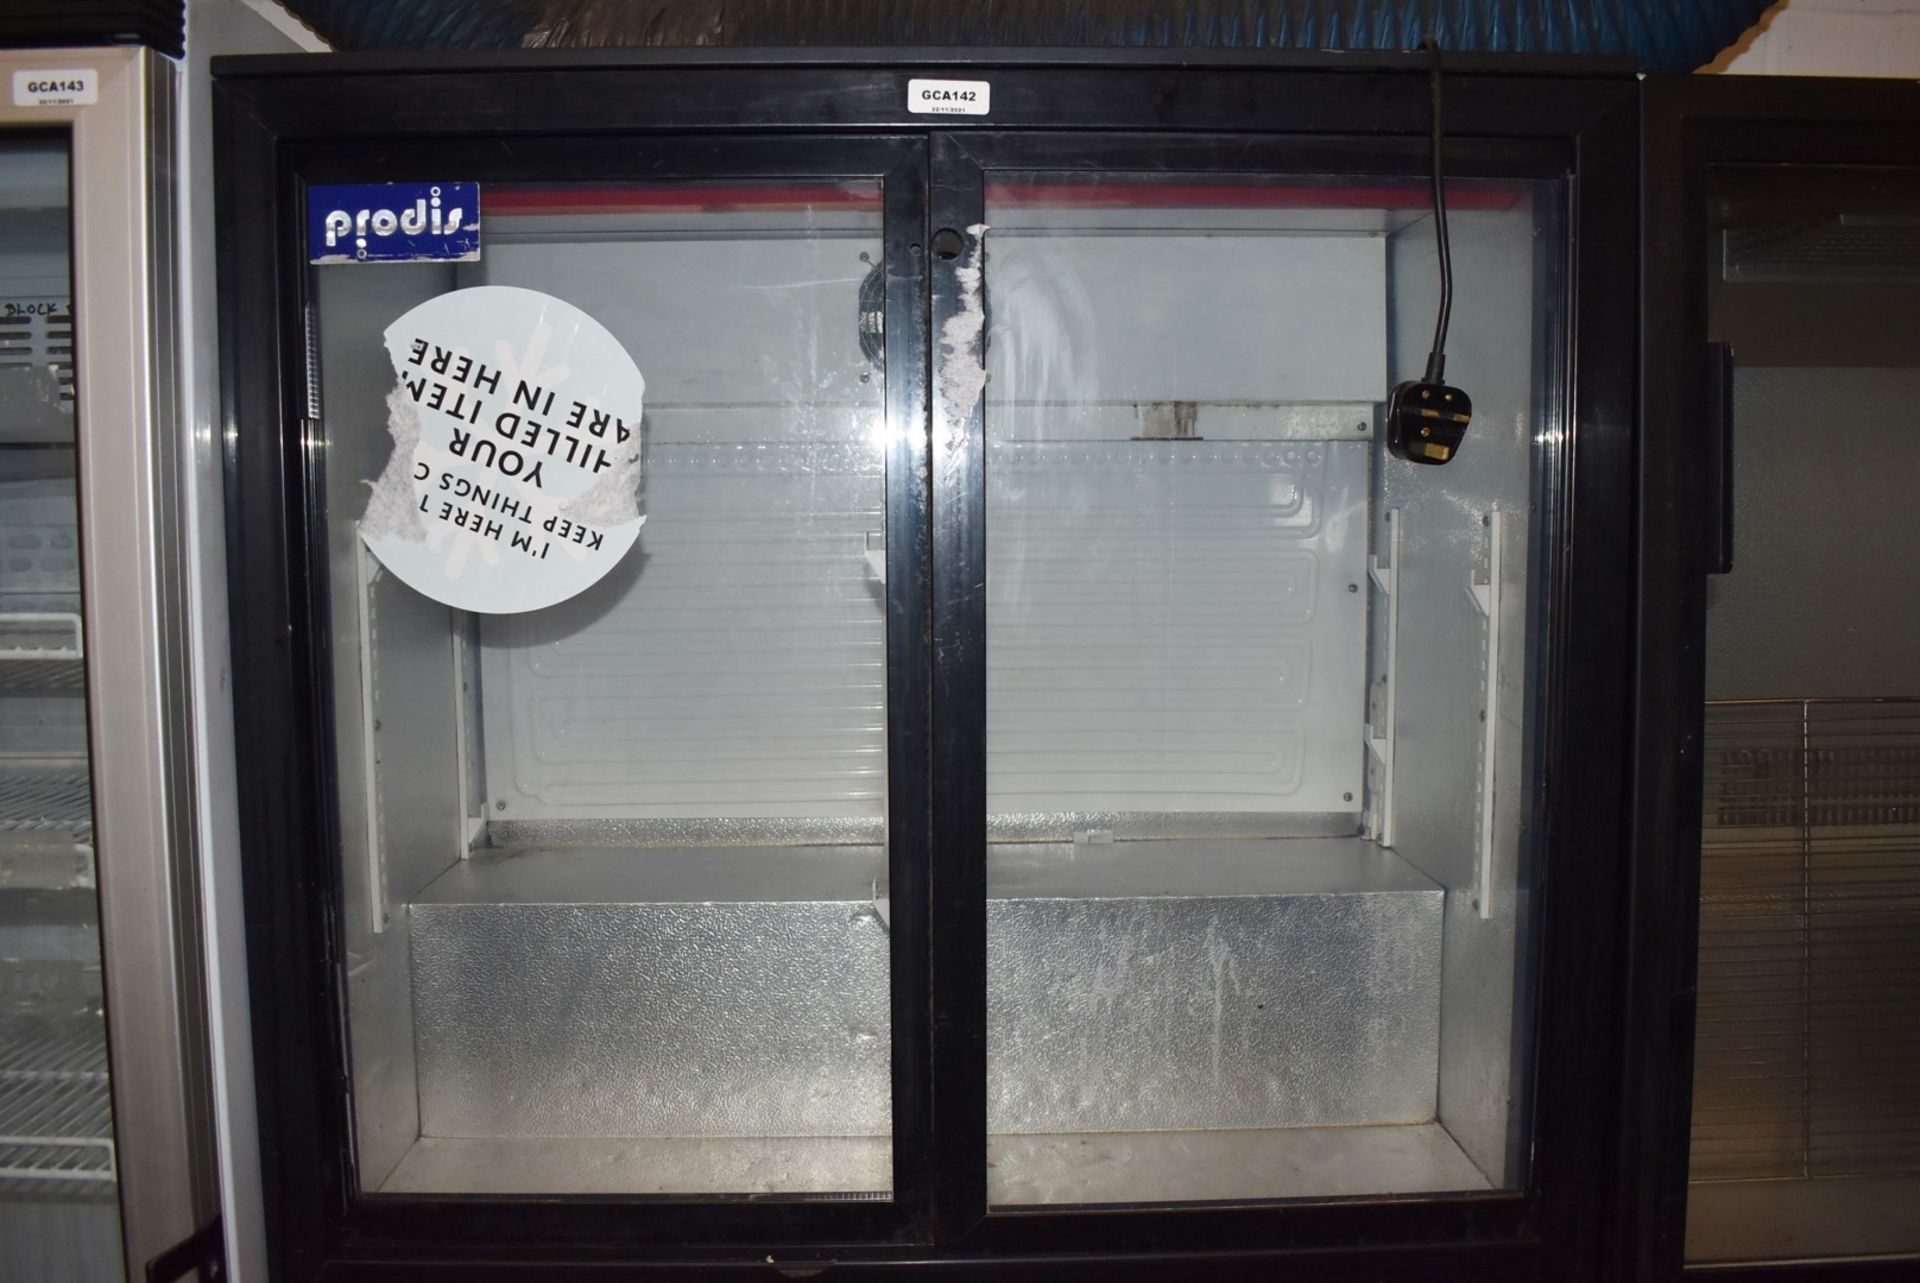 2 x Backbar Double Door Bottle Coolers - Ref: GCA142 WH5 - CL011 - Location: Altrincham WA14These - Image 4 of 6